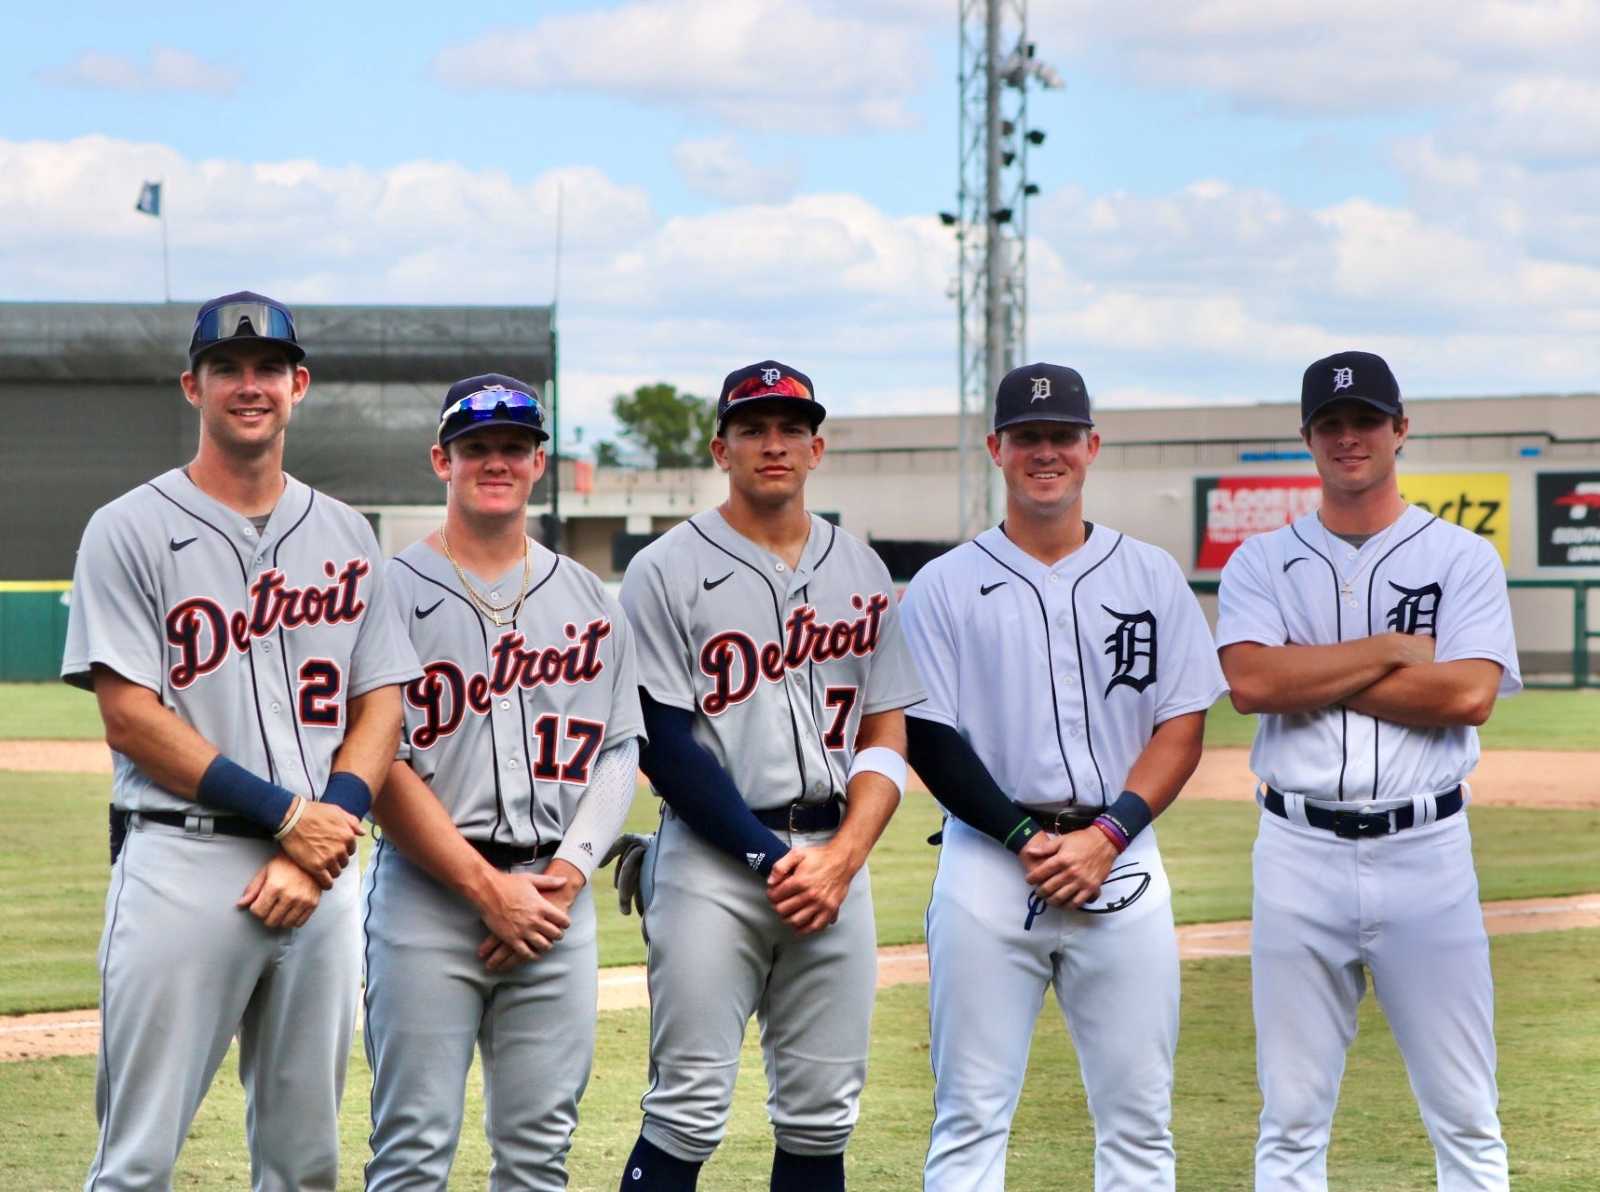 Detroit Tigers: Youth movement beginning is great for the organization